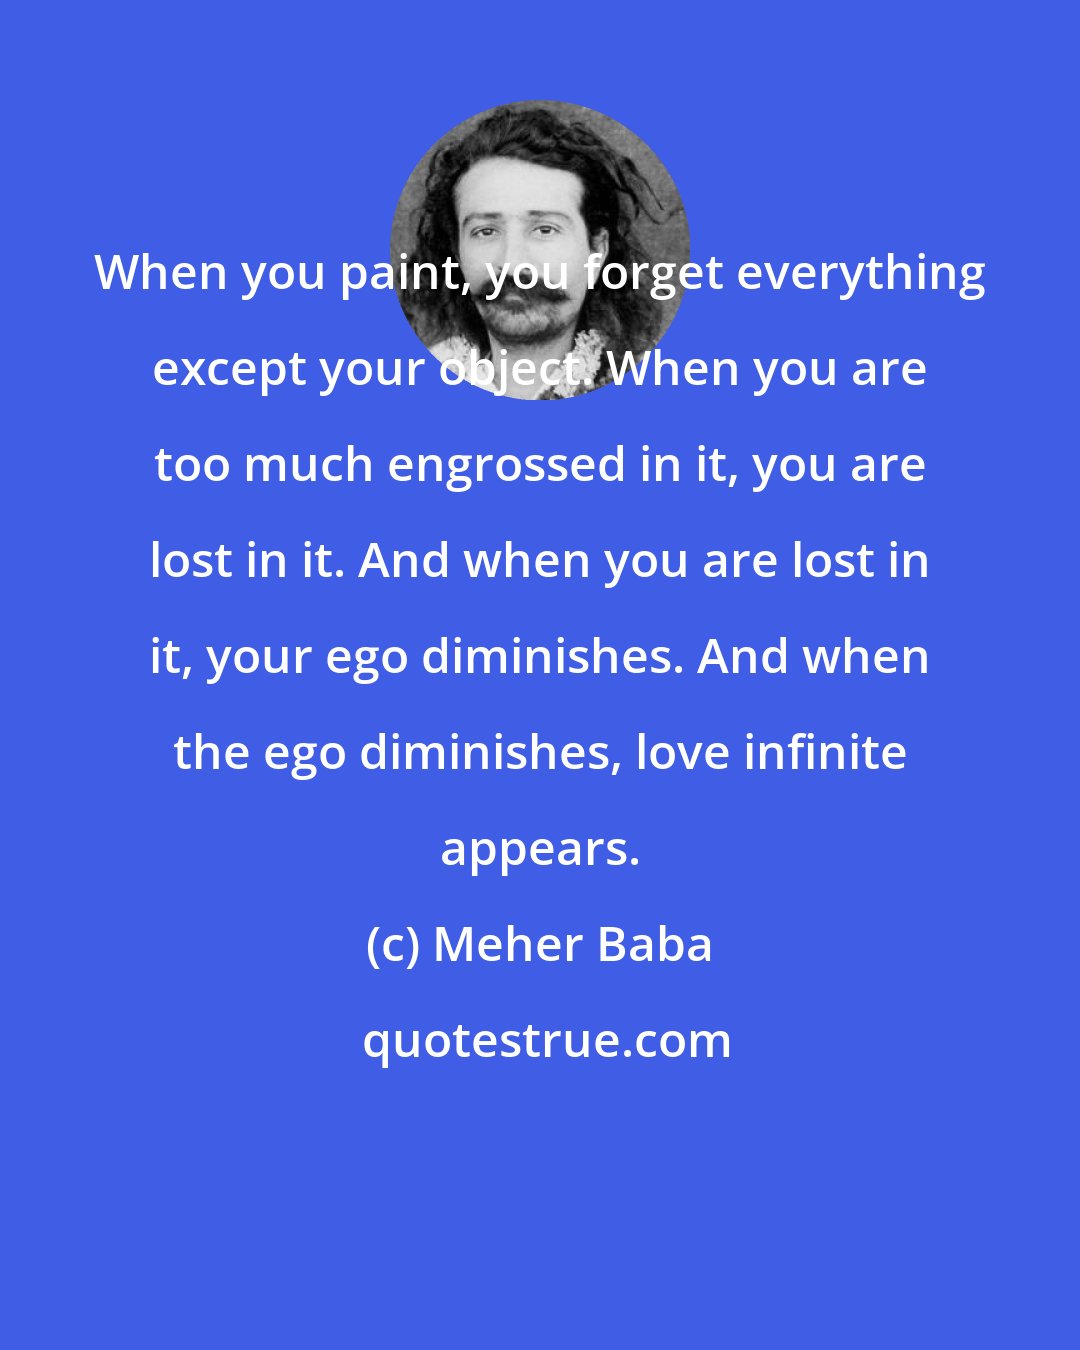 Meher Baba: When you paint, you forget everything except your object. When you are too much engrossed in it, you are lost in it. And when you are lost in it, your ego diminishes. And when the ego diminishes, love infinite appears.